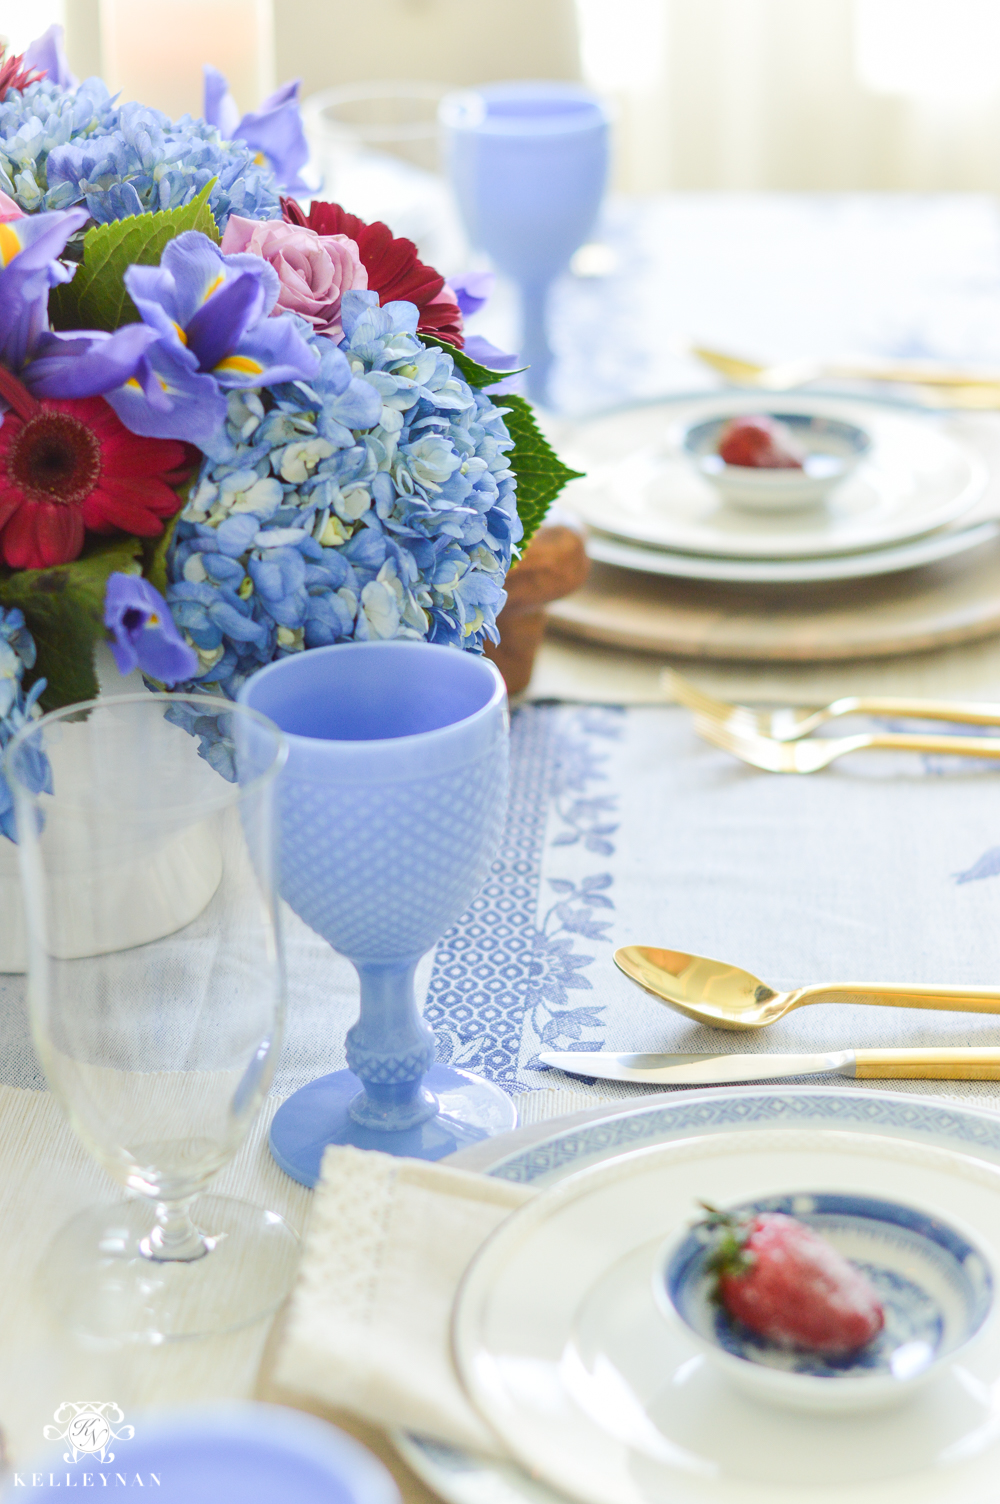 Jewel tone Mother's day table with strawberries